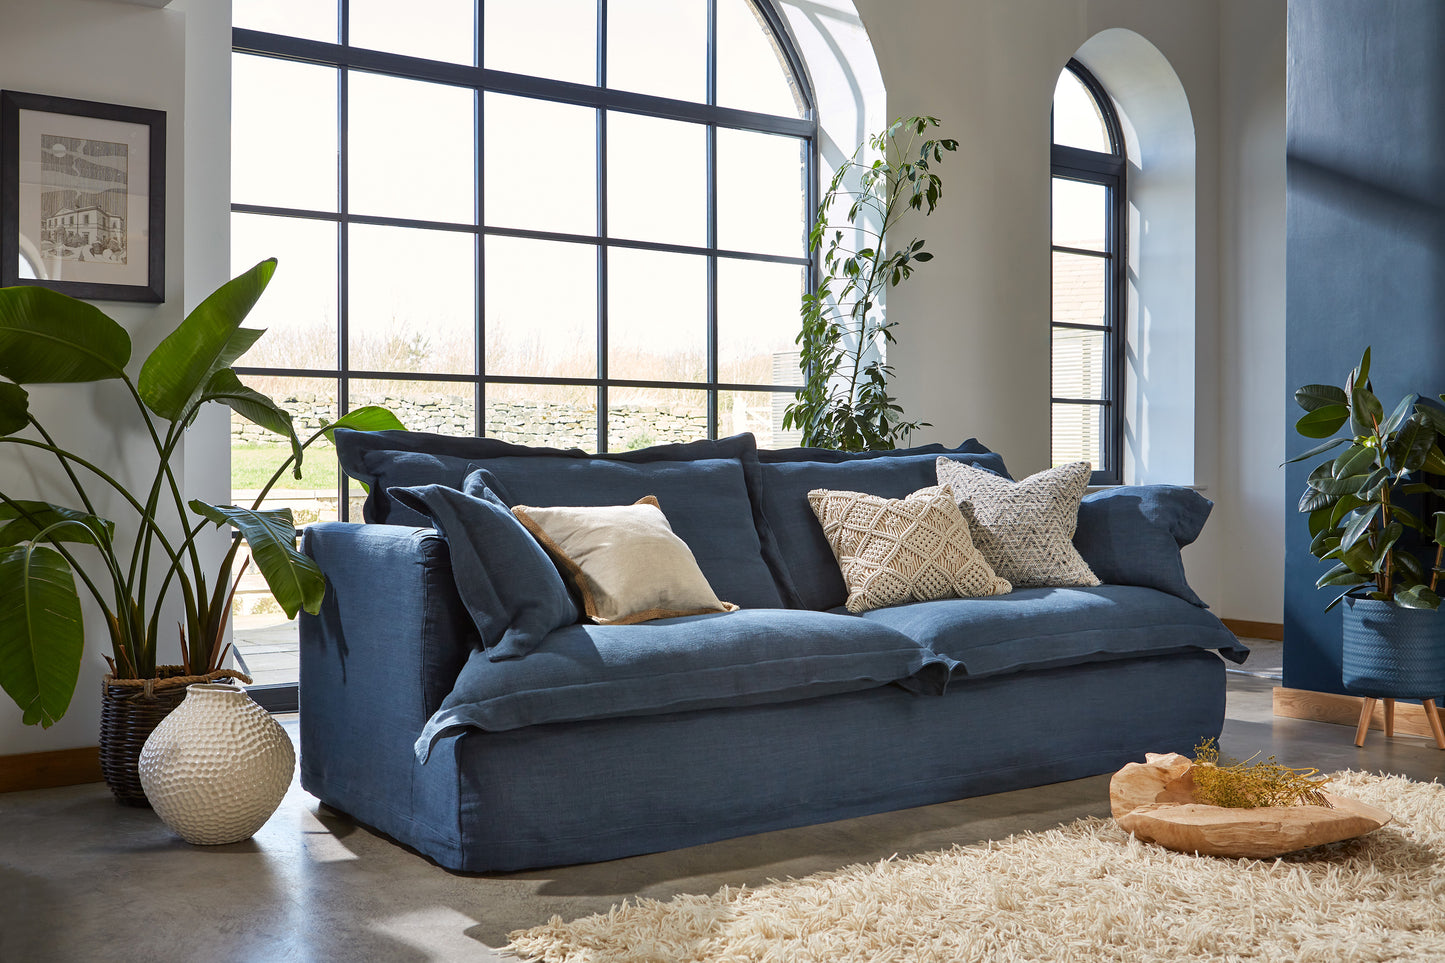 Tetrad Ava Grand loose cover sofa collection in Beatrice Wedgewood. Blue fabric sofa. Available in other sizes.